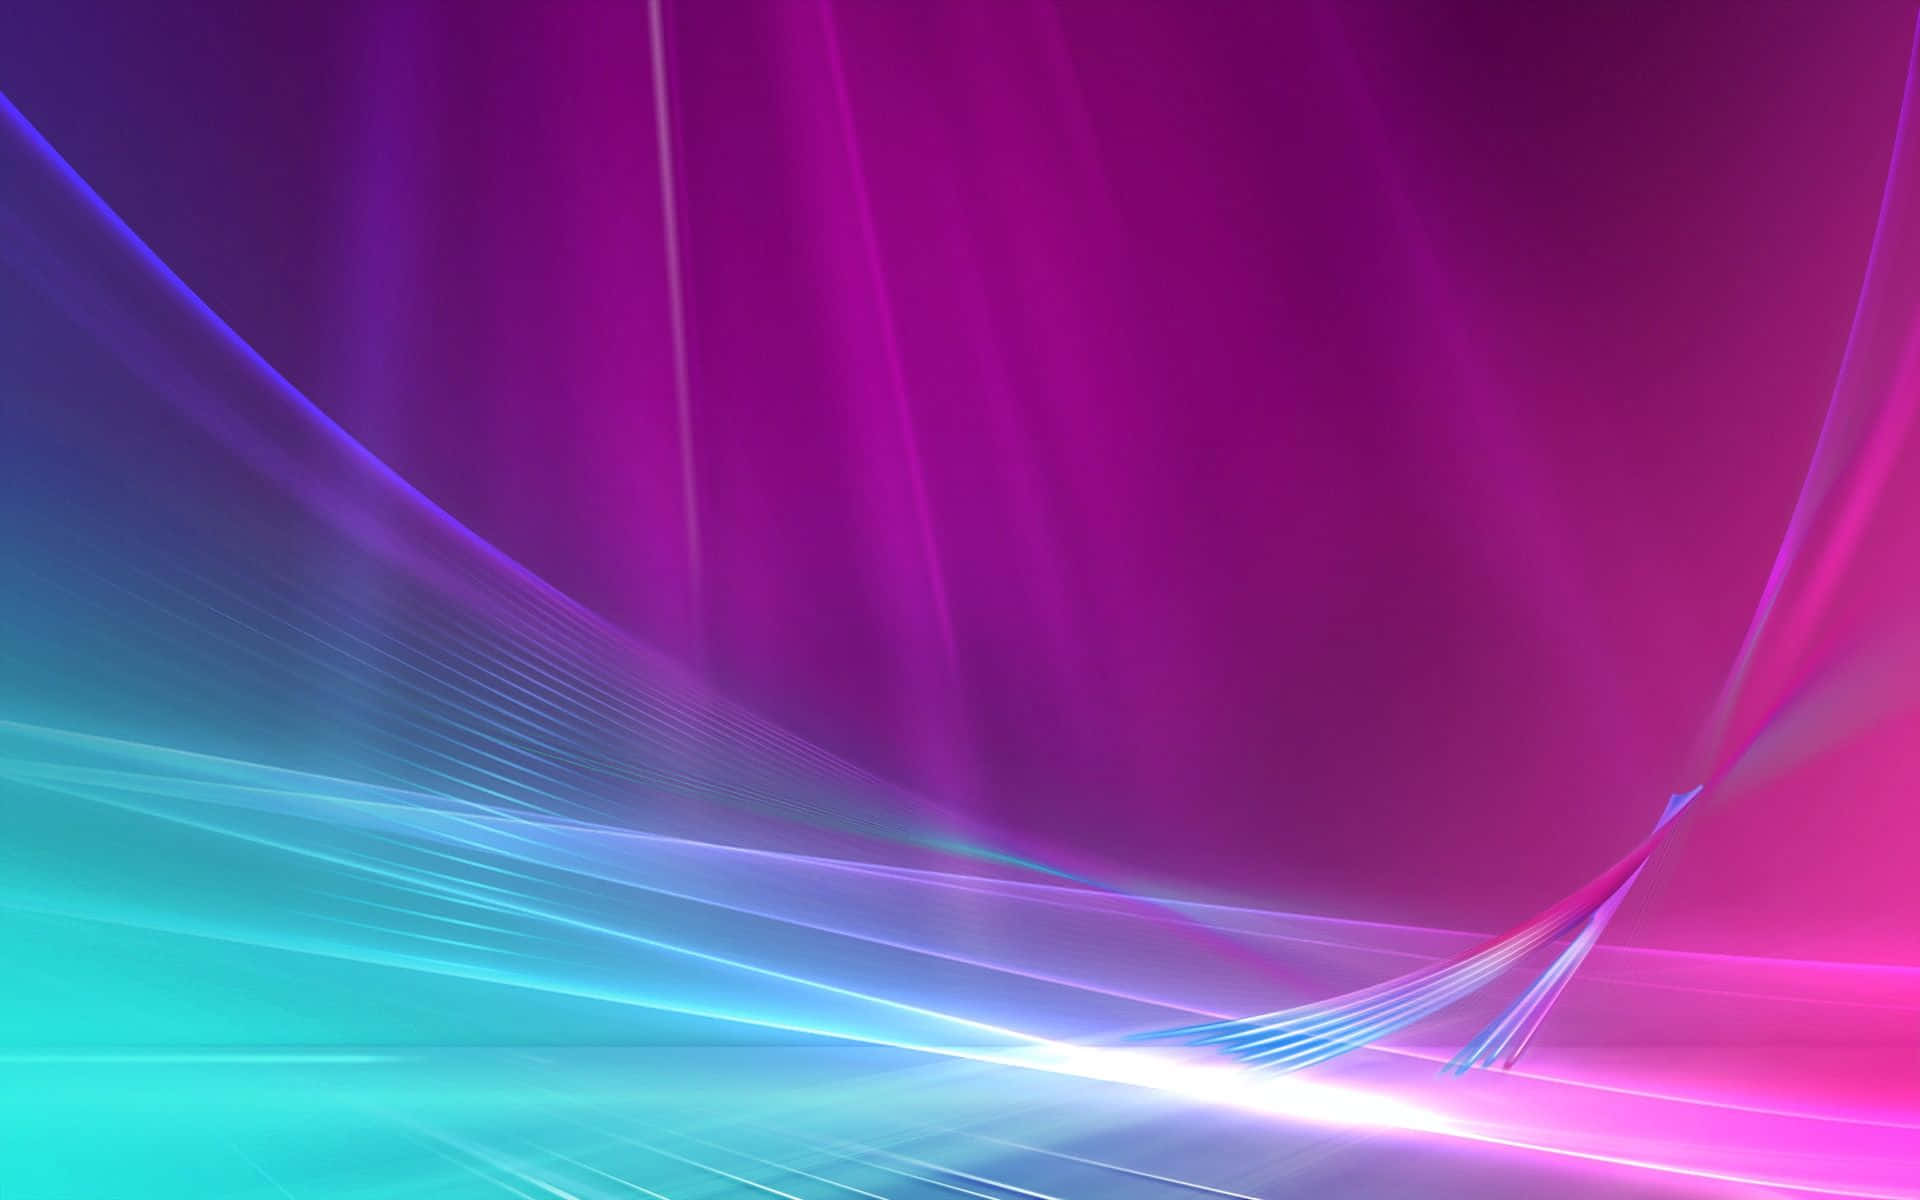 A vibranly colored magenta background with a mysterious mood.